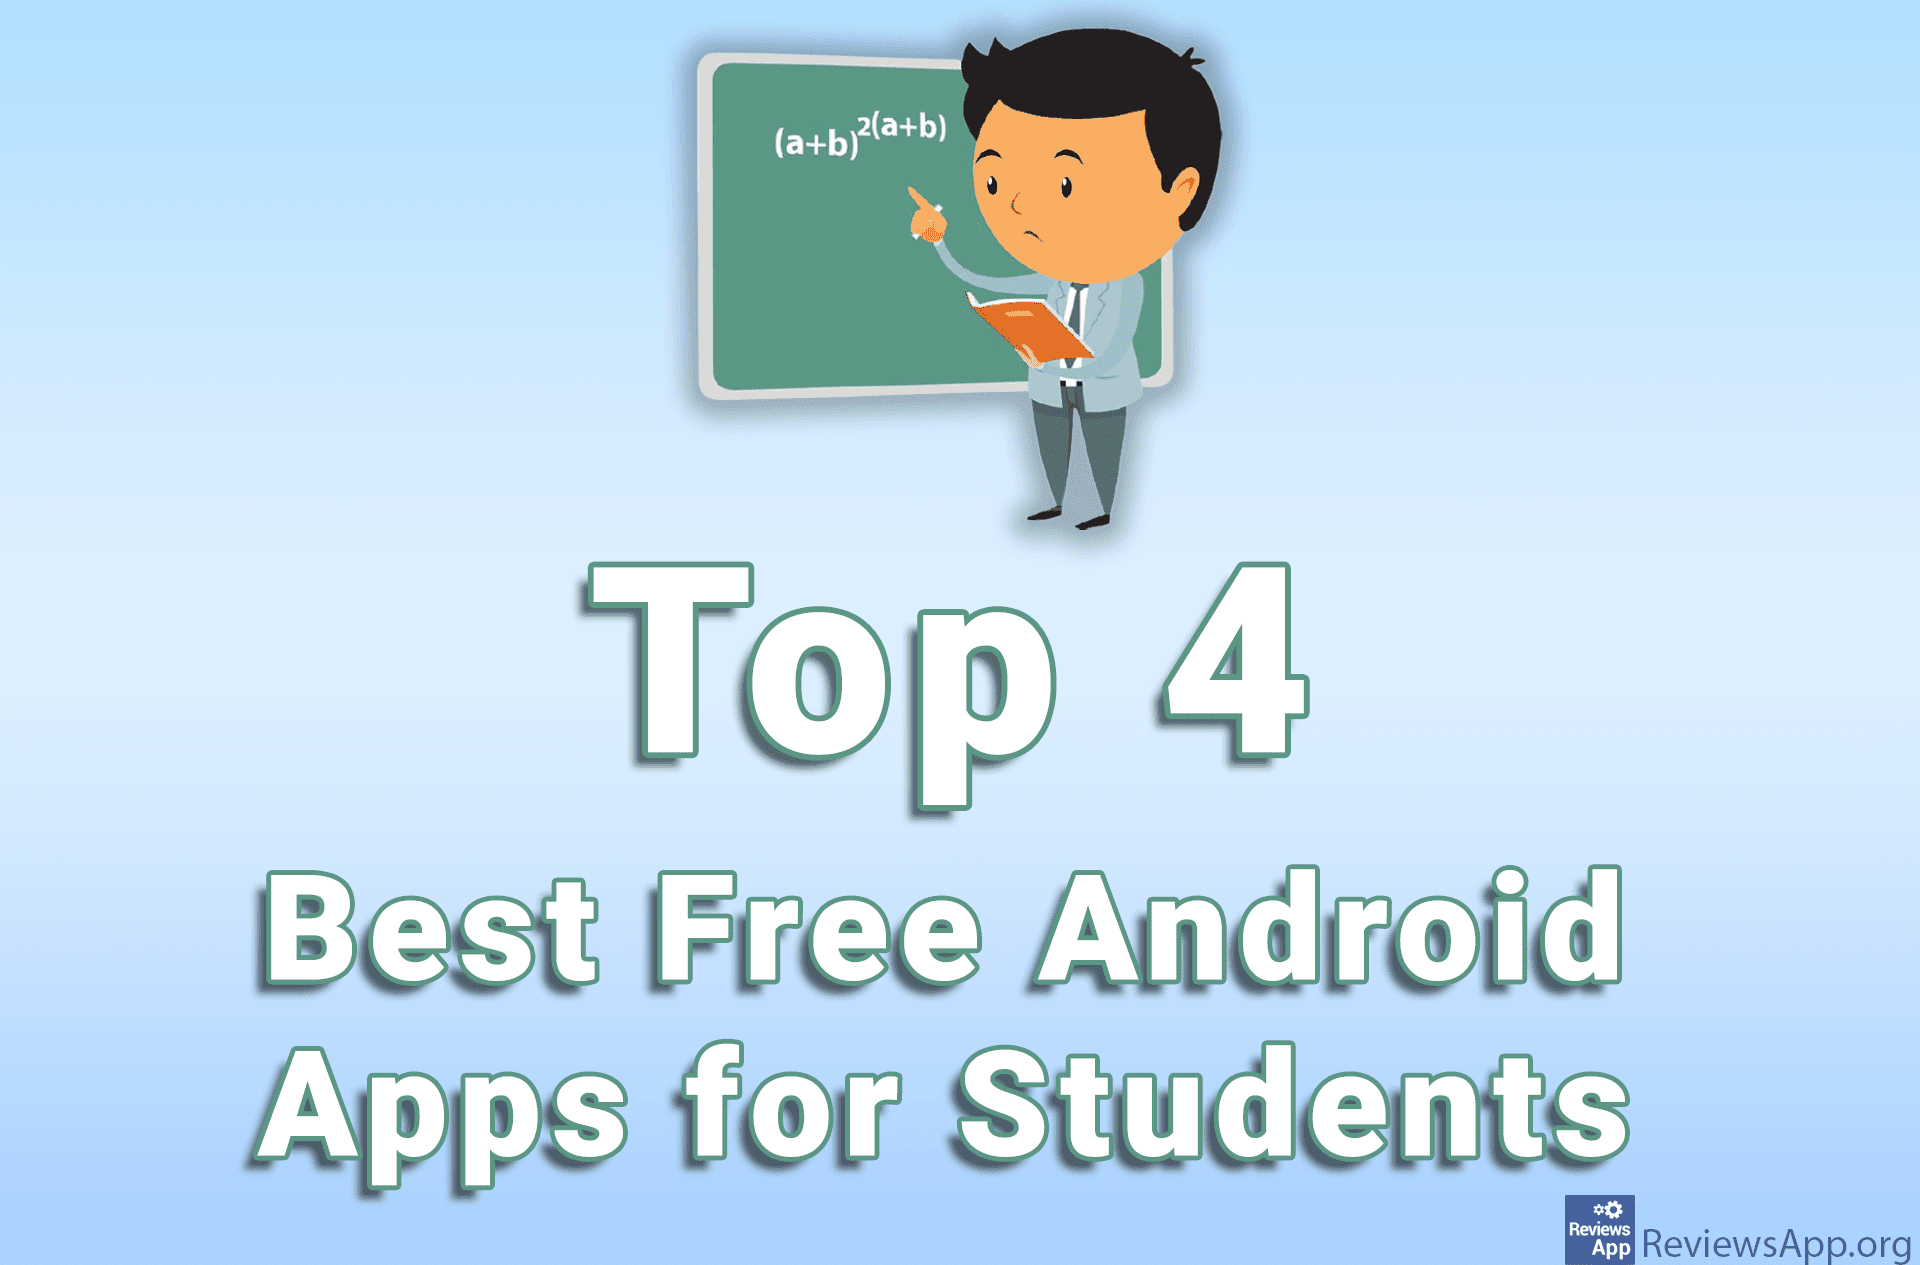 Top 4 Best Free Android Apps for Students